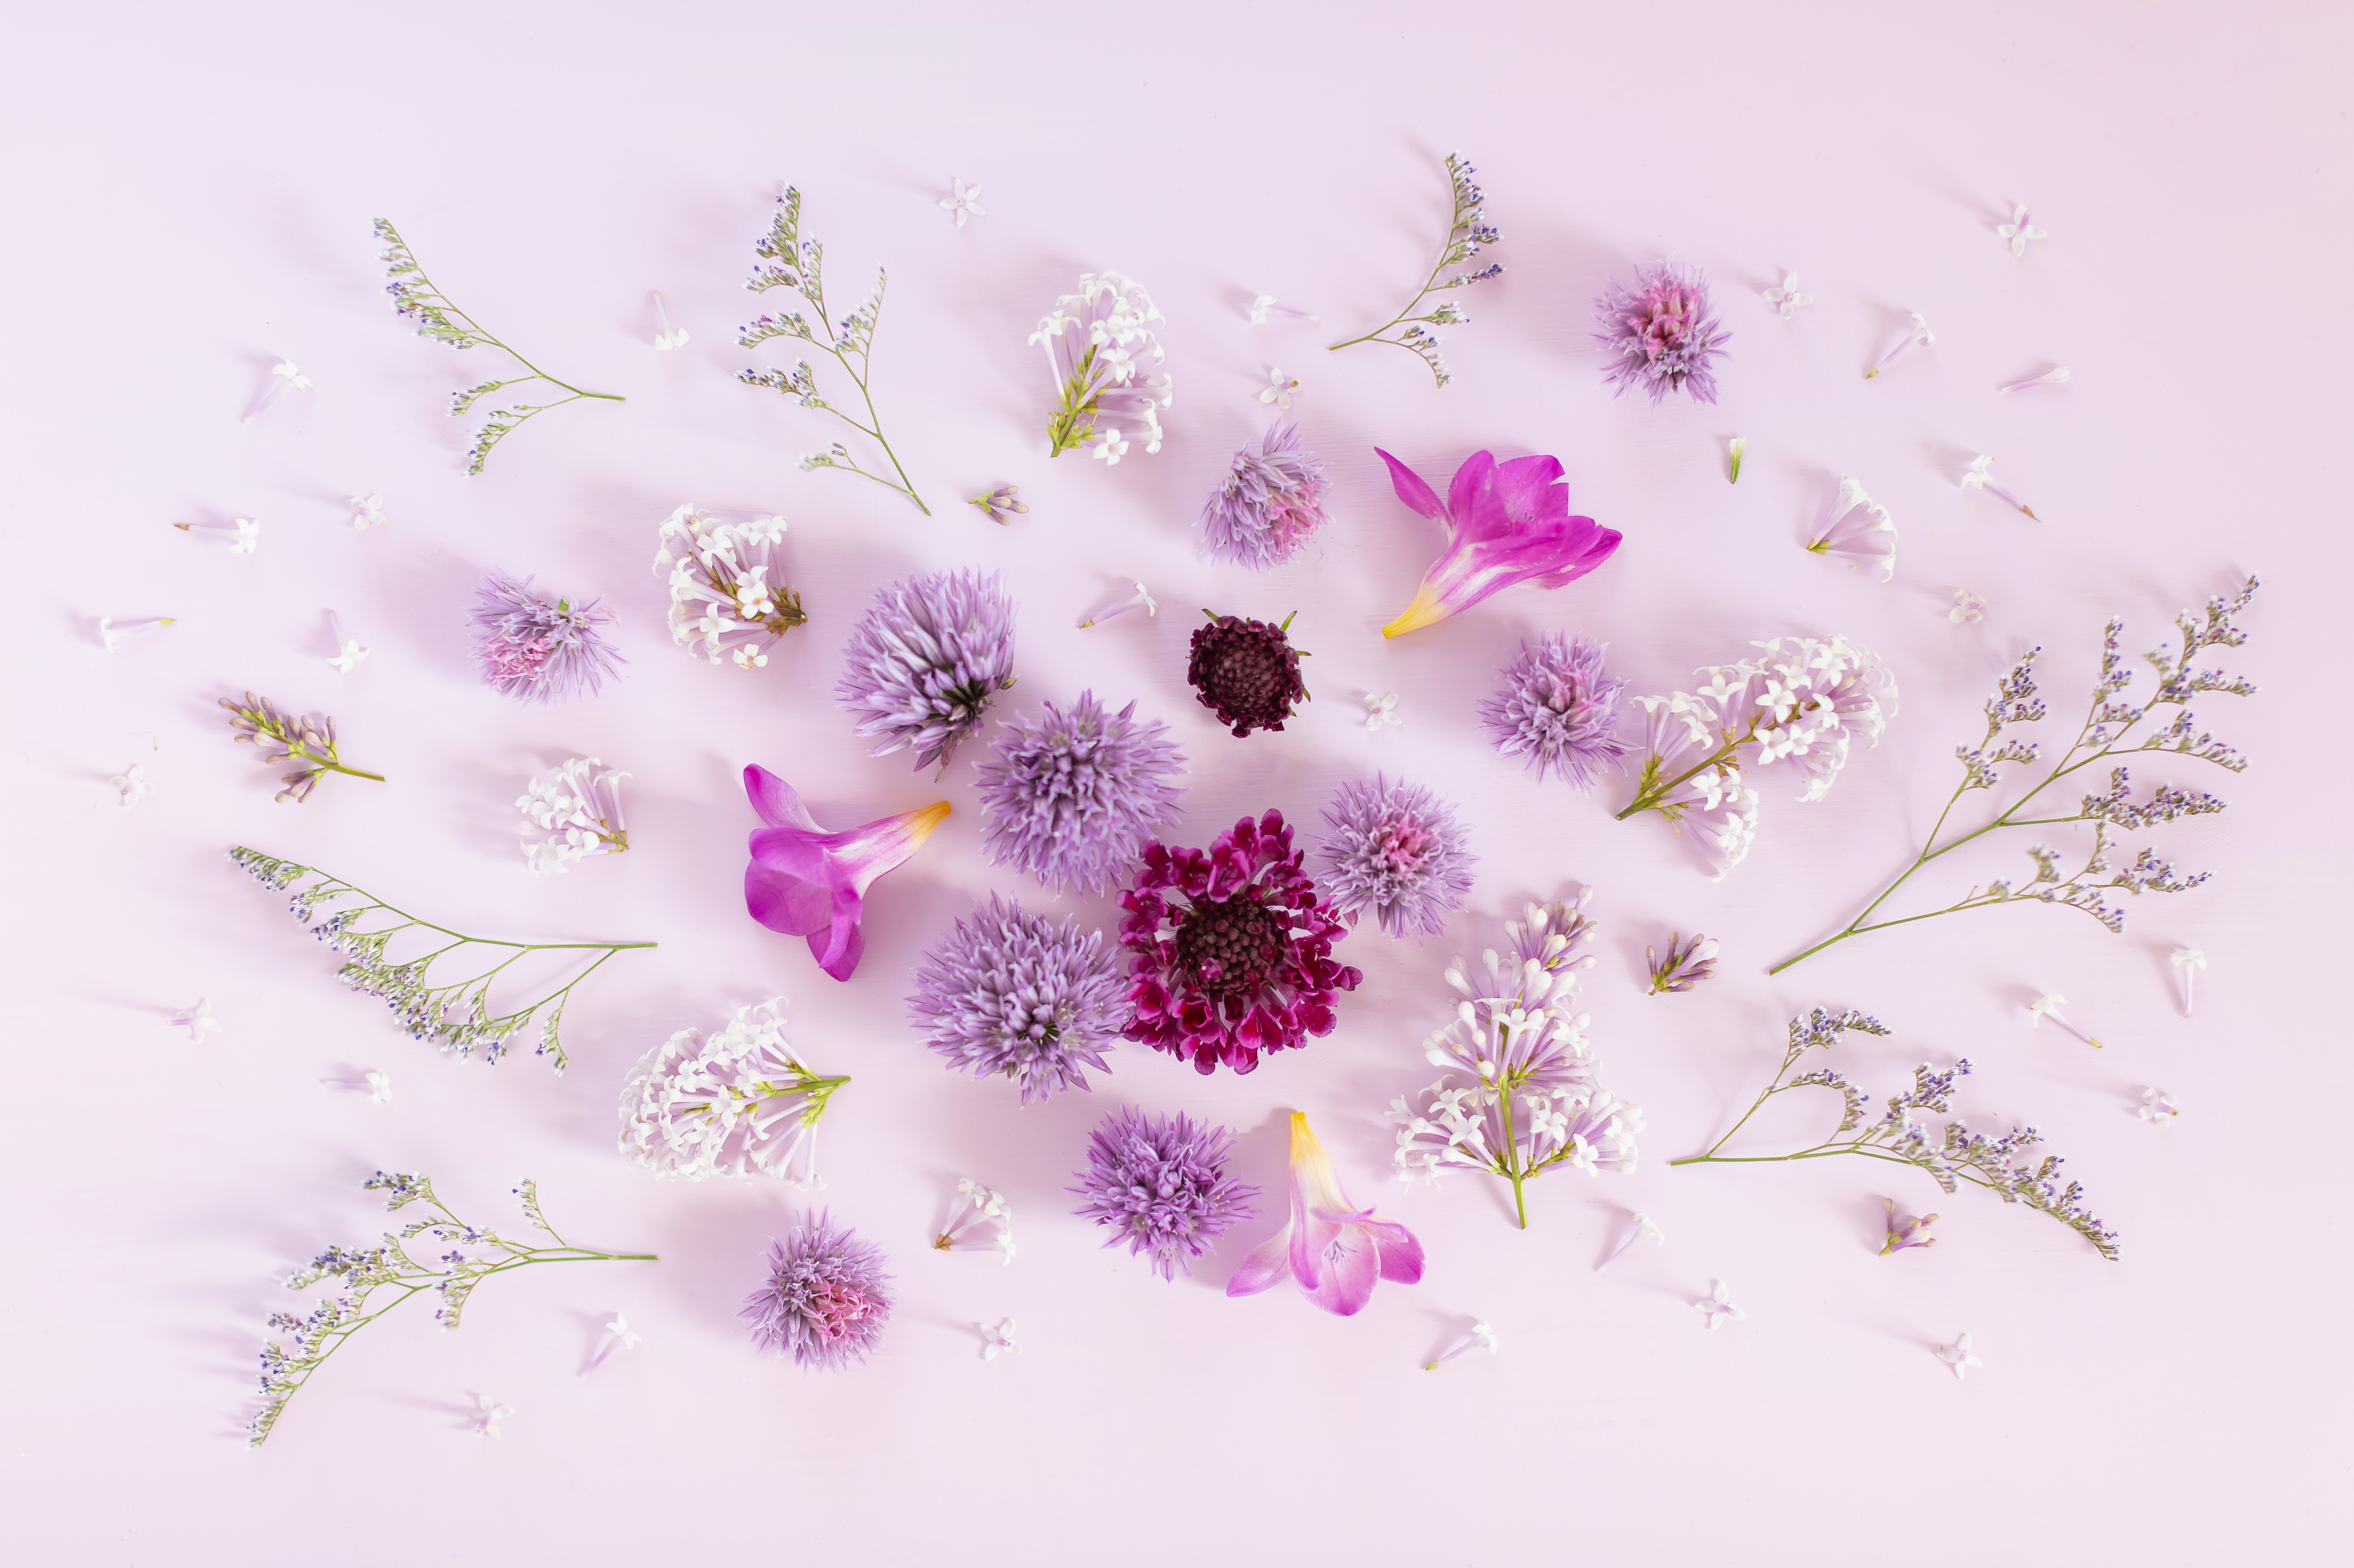 DIGITAL BLOOMS JULY 2019 | FREE DESKTOP WALLPAPER | Free Summer 2019 Floral Desktop Wallpapers featuring Lilacs, Chive Fllowers, Freesia, Scabiosa and Misty Blue Statice on a lavender background | Free Lavender Lilac Floral Wallpapers for Summer | Spring / Summer 2019 Tech Wallpapers | FREE Purple Floral Tech Wallpapers | The Best FREE Summer Tech Wallpapers | Free Floral Tech Wallpapers Summer 2019 // JustineCelina.com 